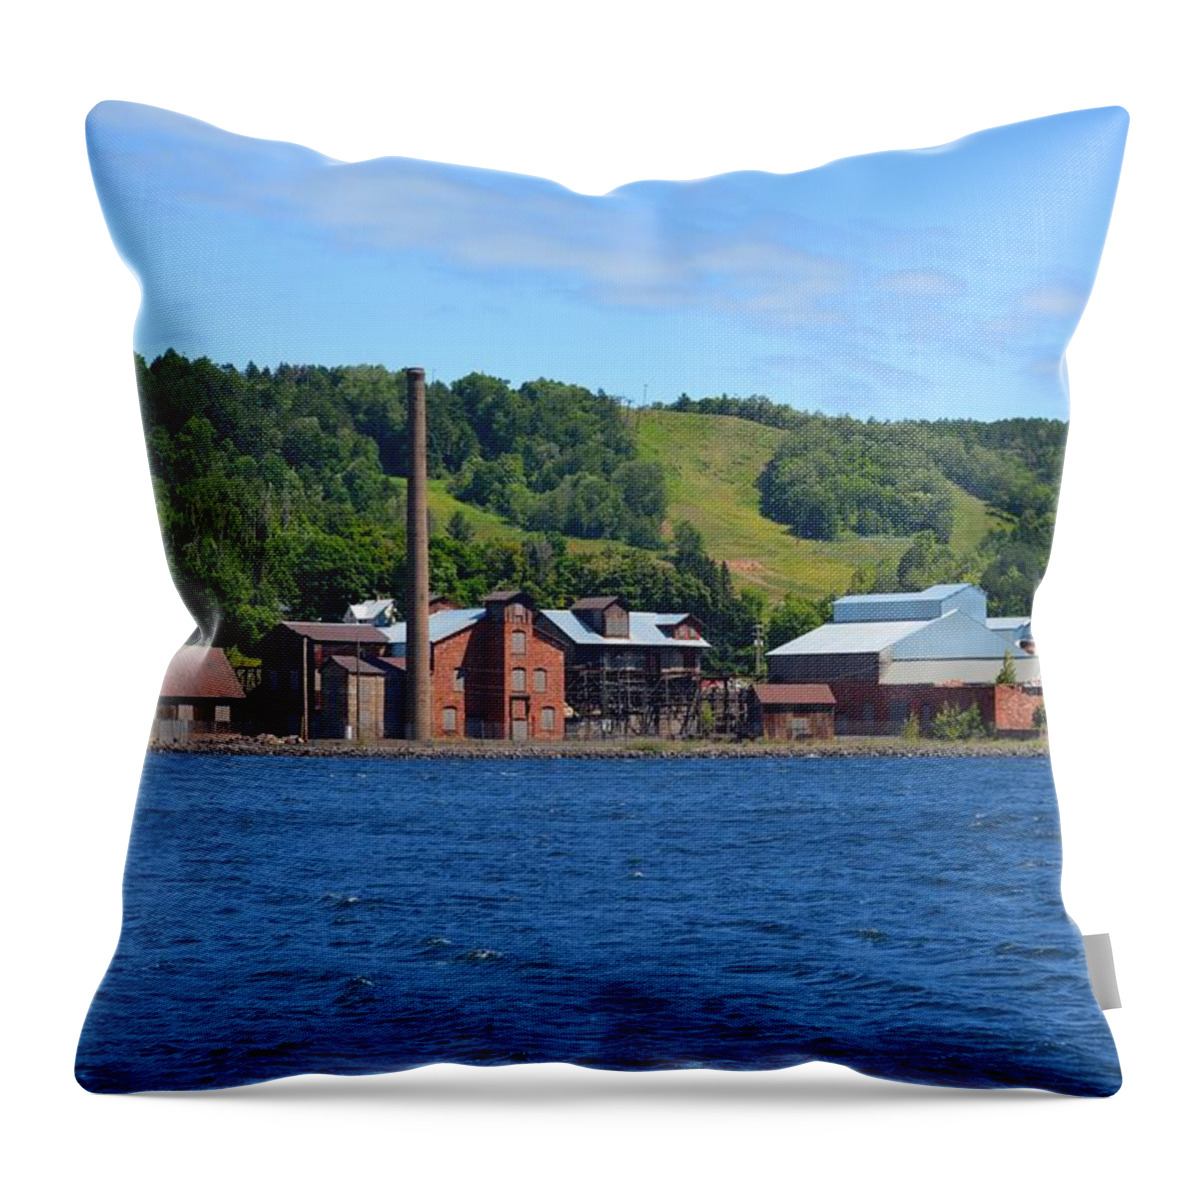 Keweenaw Throw Pillow featuring the photograph Quincy Smelting Works by Keith Stokes